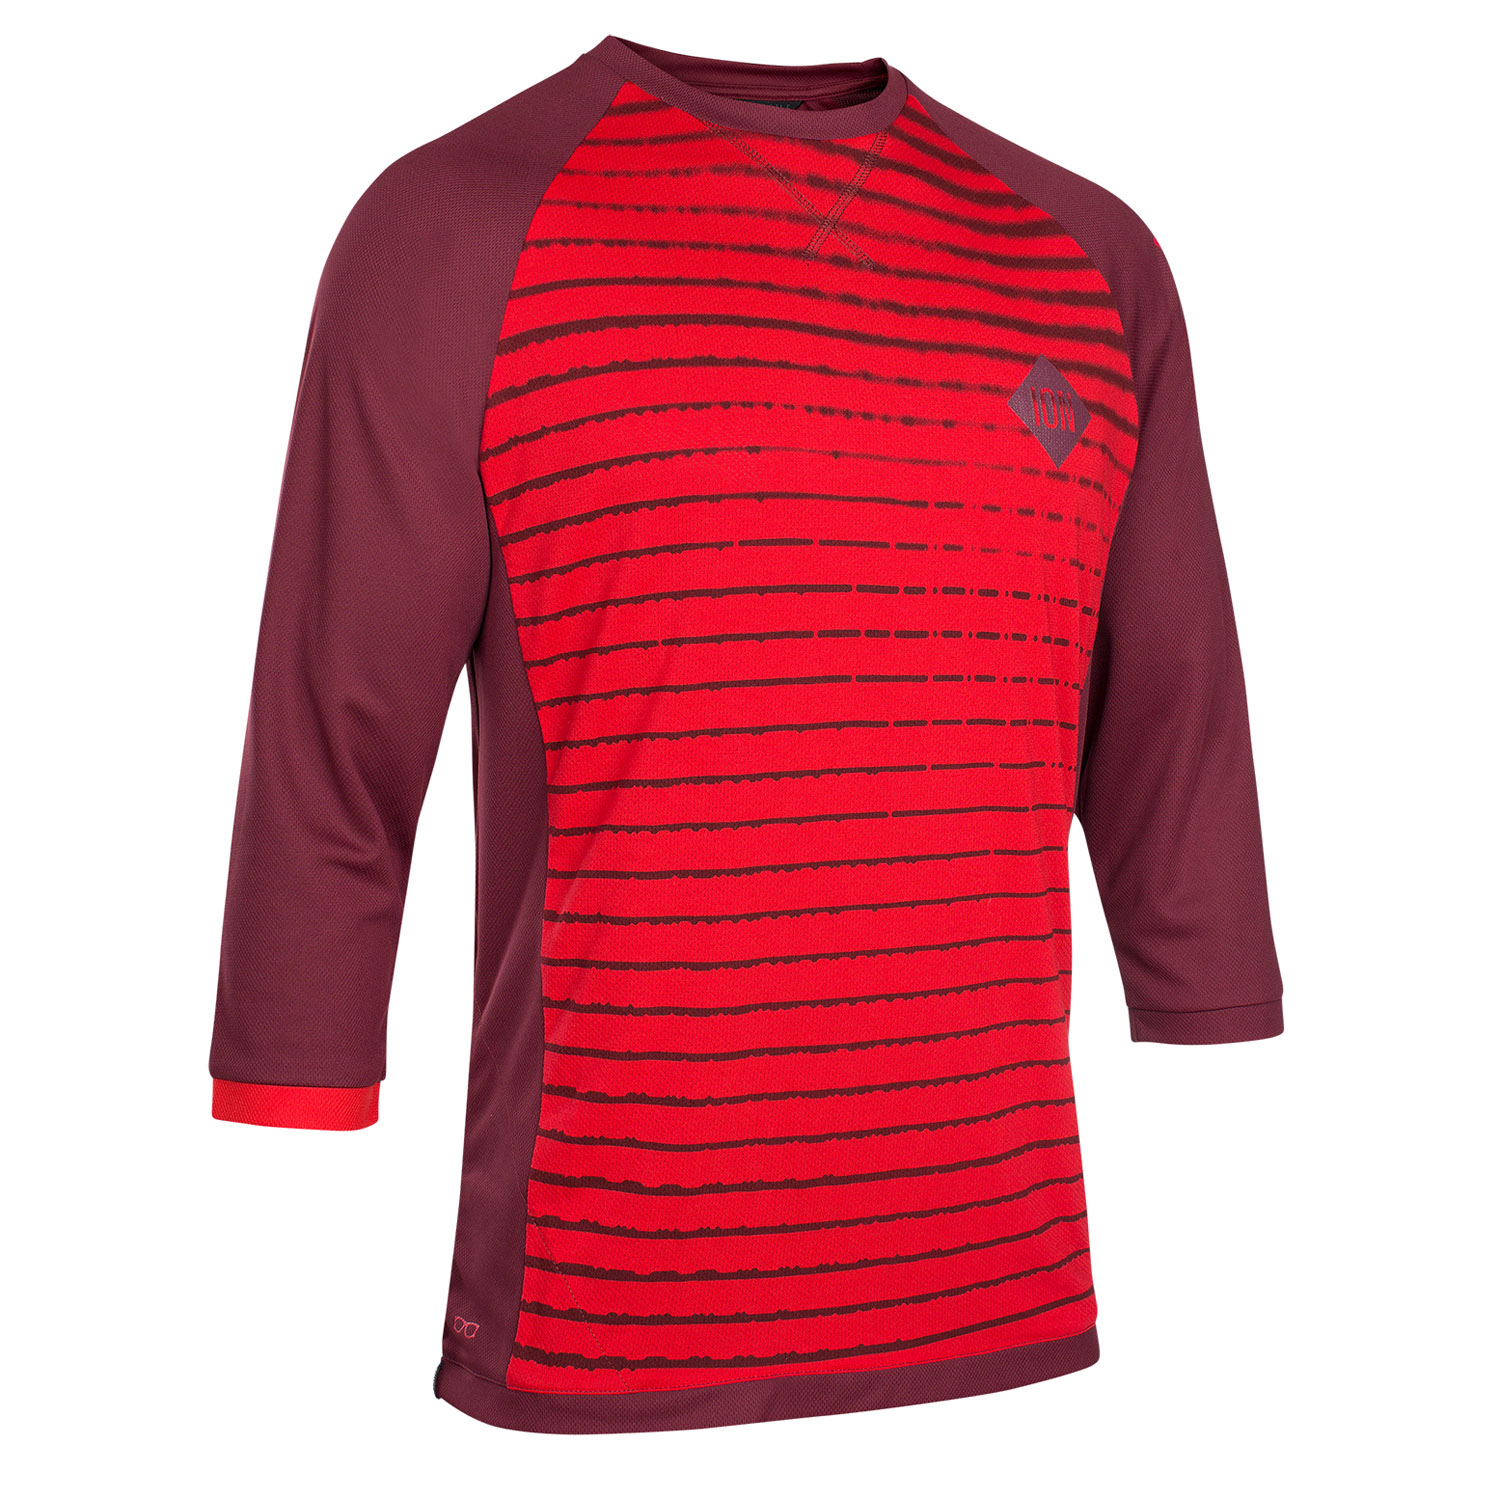 ION Maillot VTT Manches 3/4 Scrub Amp Combat Red